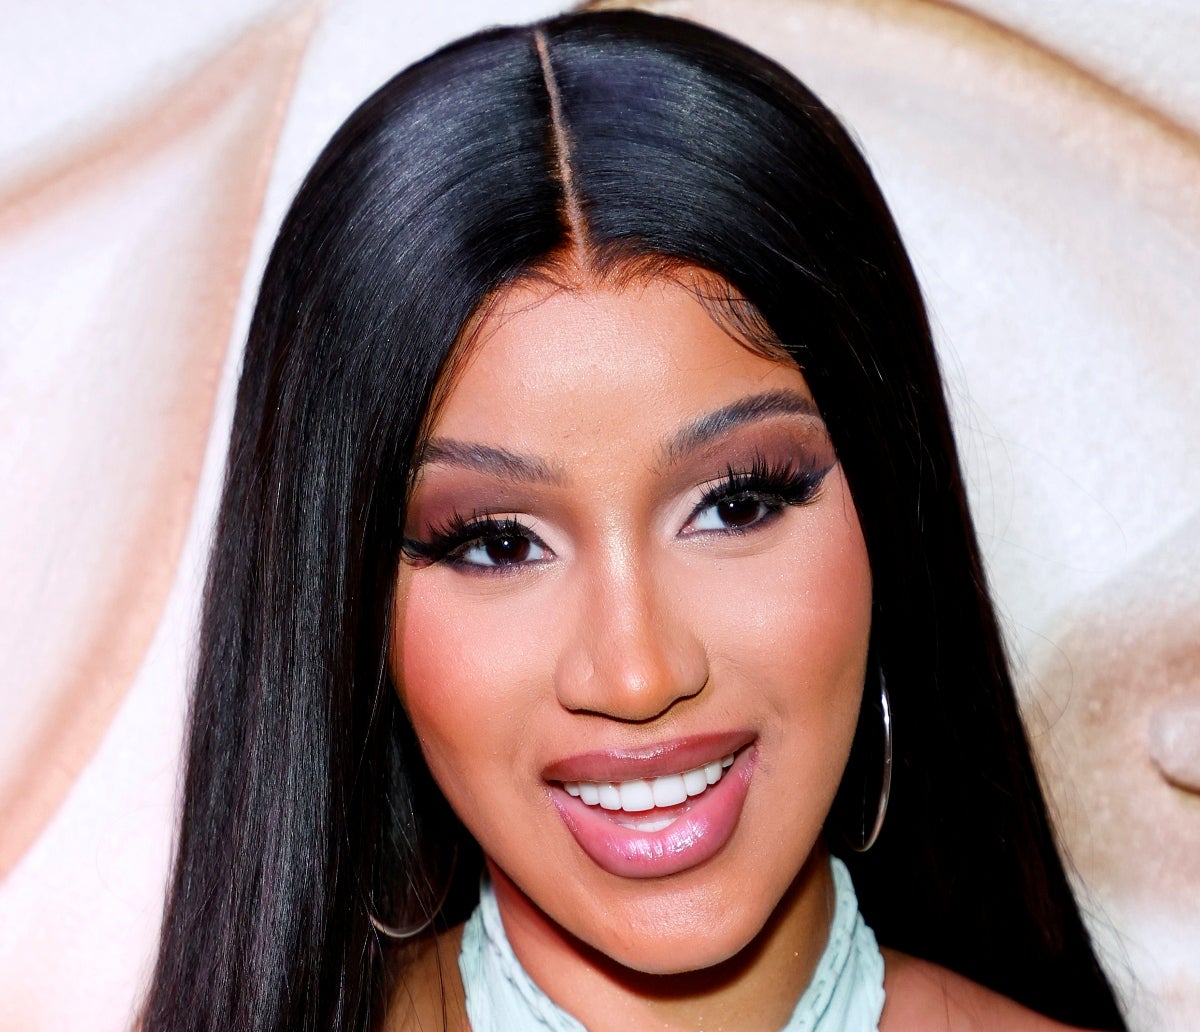 Cardi B On Criticisms She's More Focused On Money Than Music: 'I Have To Make Sure That I Make A Future For My Kids'